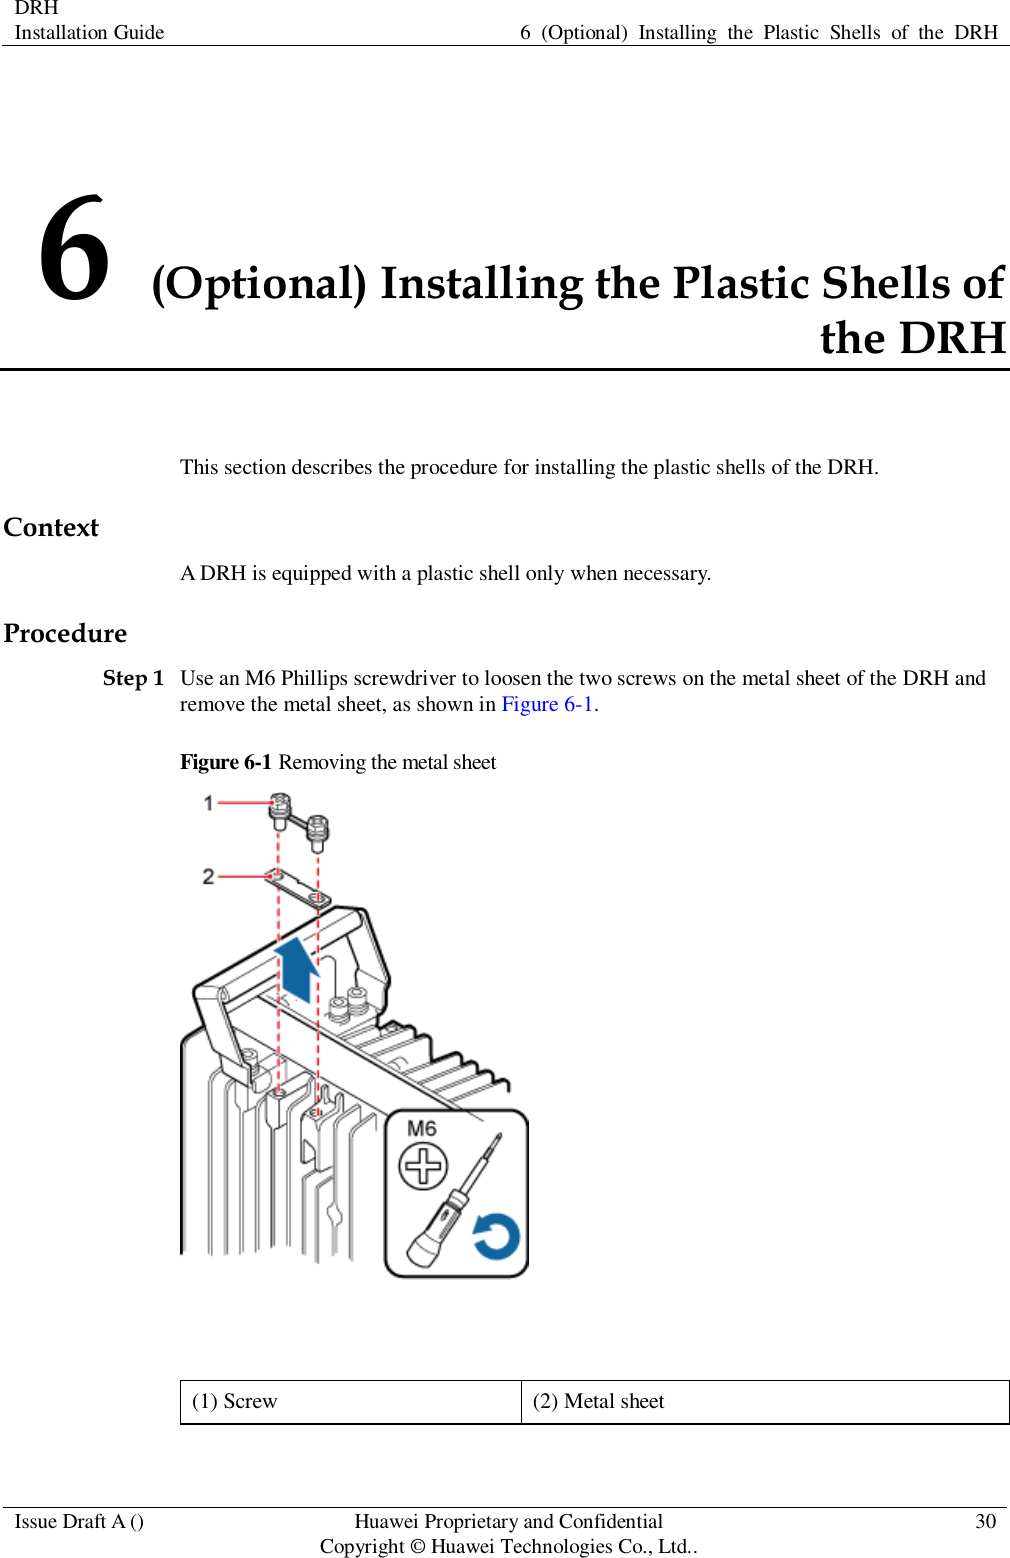 DRH   Installation Guide 6  (Optional)  Installing  the  Plastic  Shells  of  the  DRH  Issue Draft A () Huawei Proprietary and Confidential                                     Copyright © Huawei Technologies Co., Ltd.. 30  6 (Optional) Installing the Plastic Shells of the DRH This section describes the procedure for installing the plastic shells of the DRH. Context A DRH is equipped with a plastic shell only when necessary. Procedure Step 1 Use an M6 Phillips screwdriver to loosen the two screws on the metal sheet of the DRH and remove the metal sheet, as shown in Figure 6-1. Figure 6-1 Removing the metal sheet   (1) Screw (2) Metal sheet 